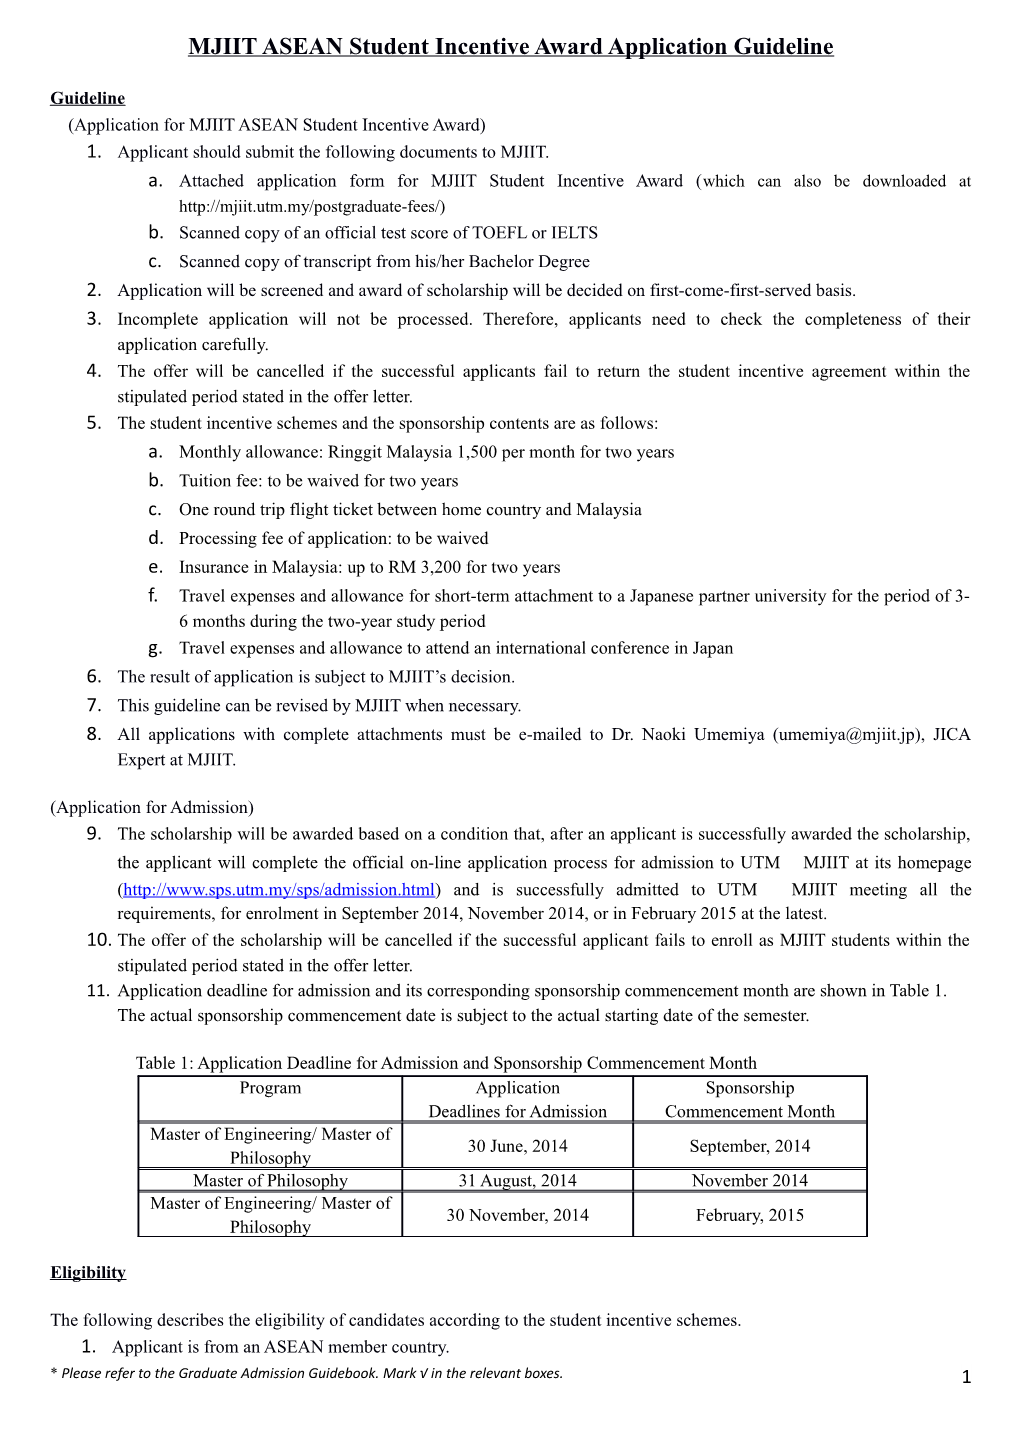 MJIIT ASEAN Student Incentive Award Application Guideline